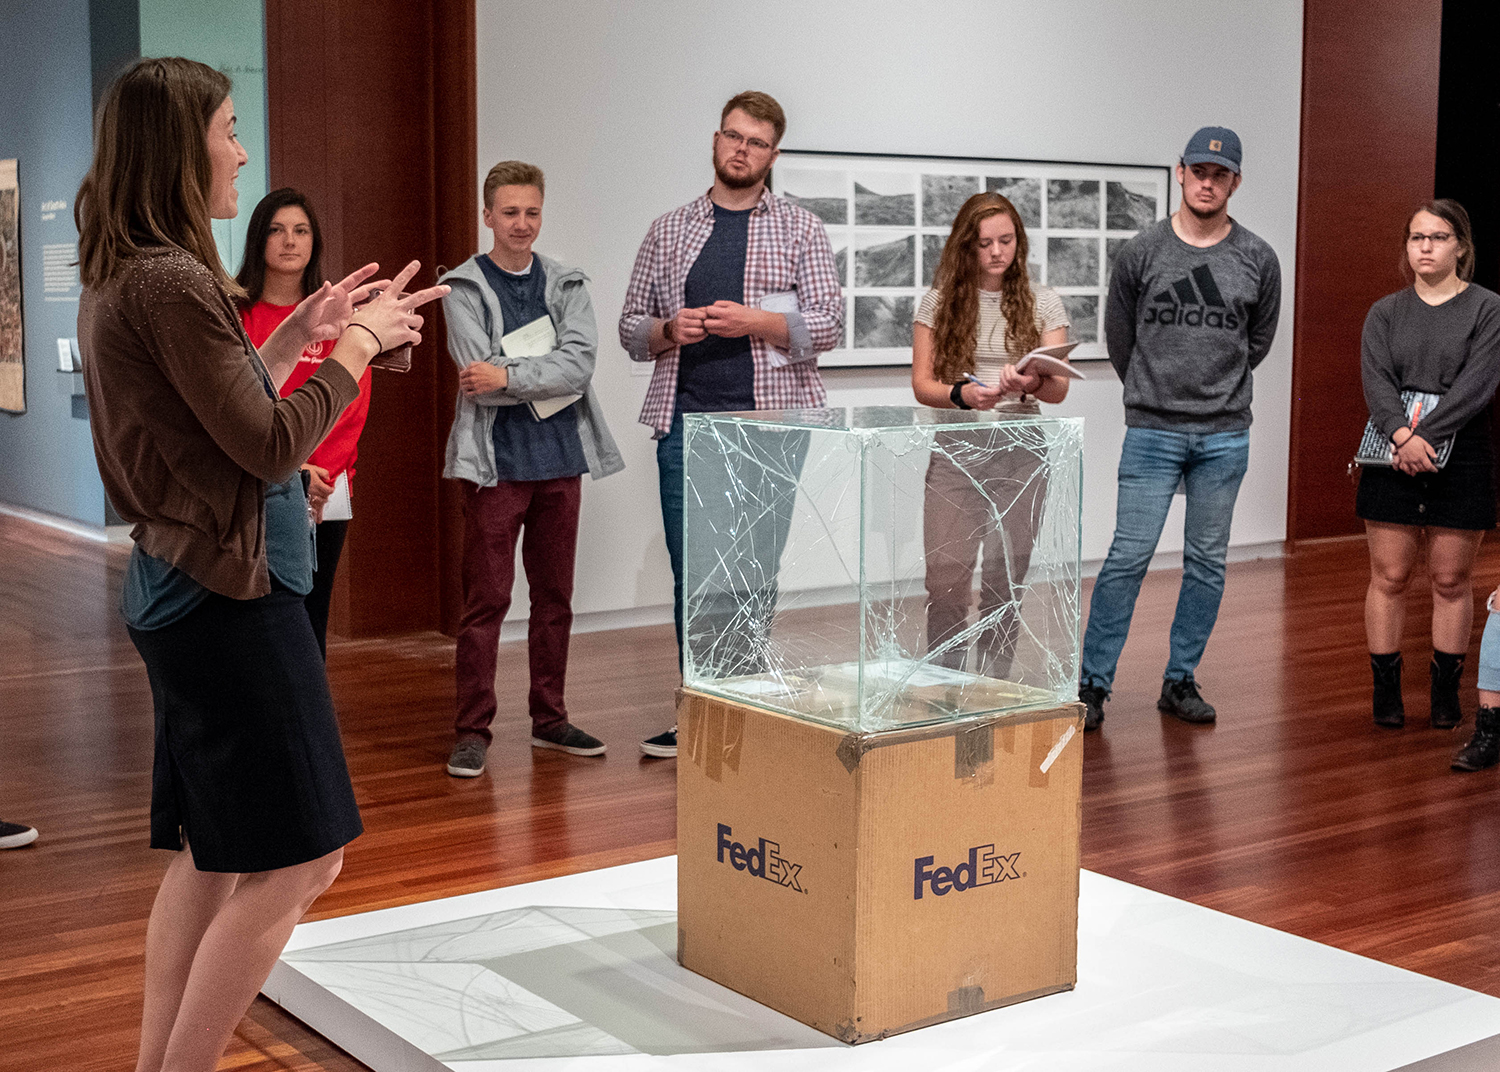 Whitney Tassie discuss a sculpture of a large cracked glass box with a group of University students